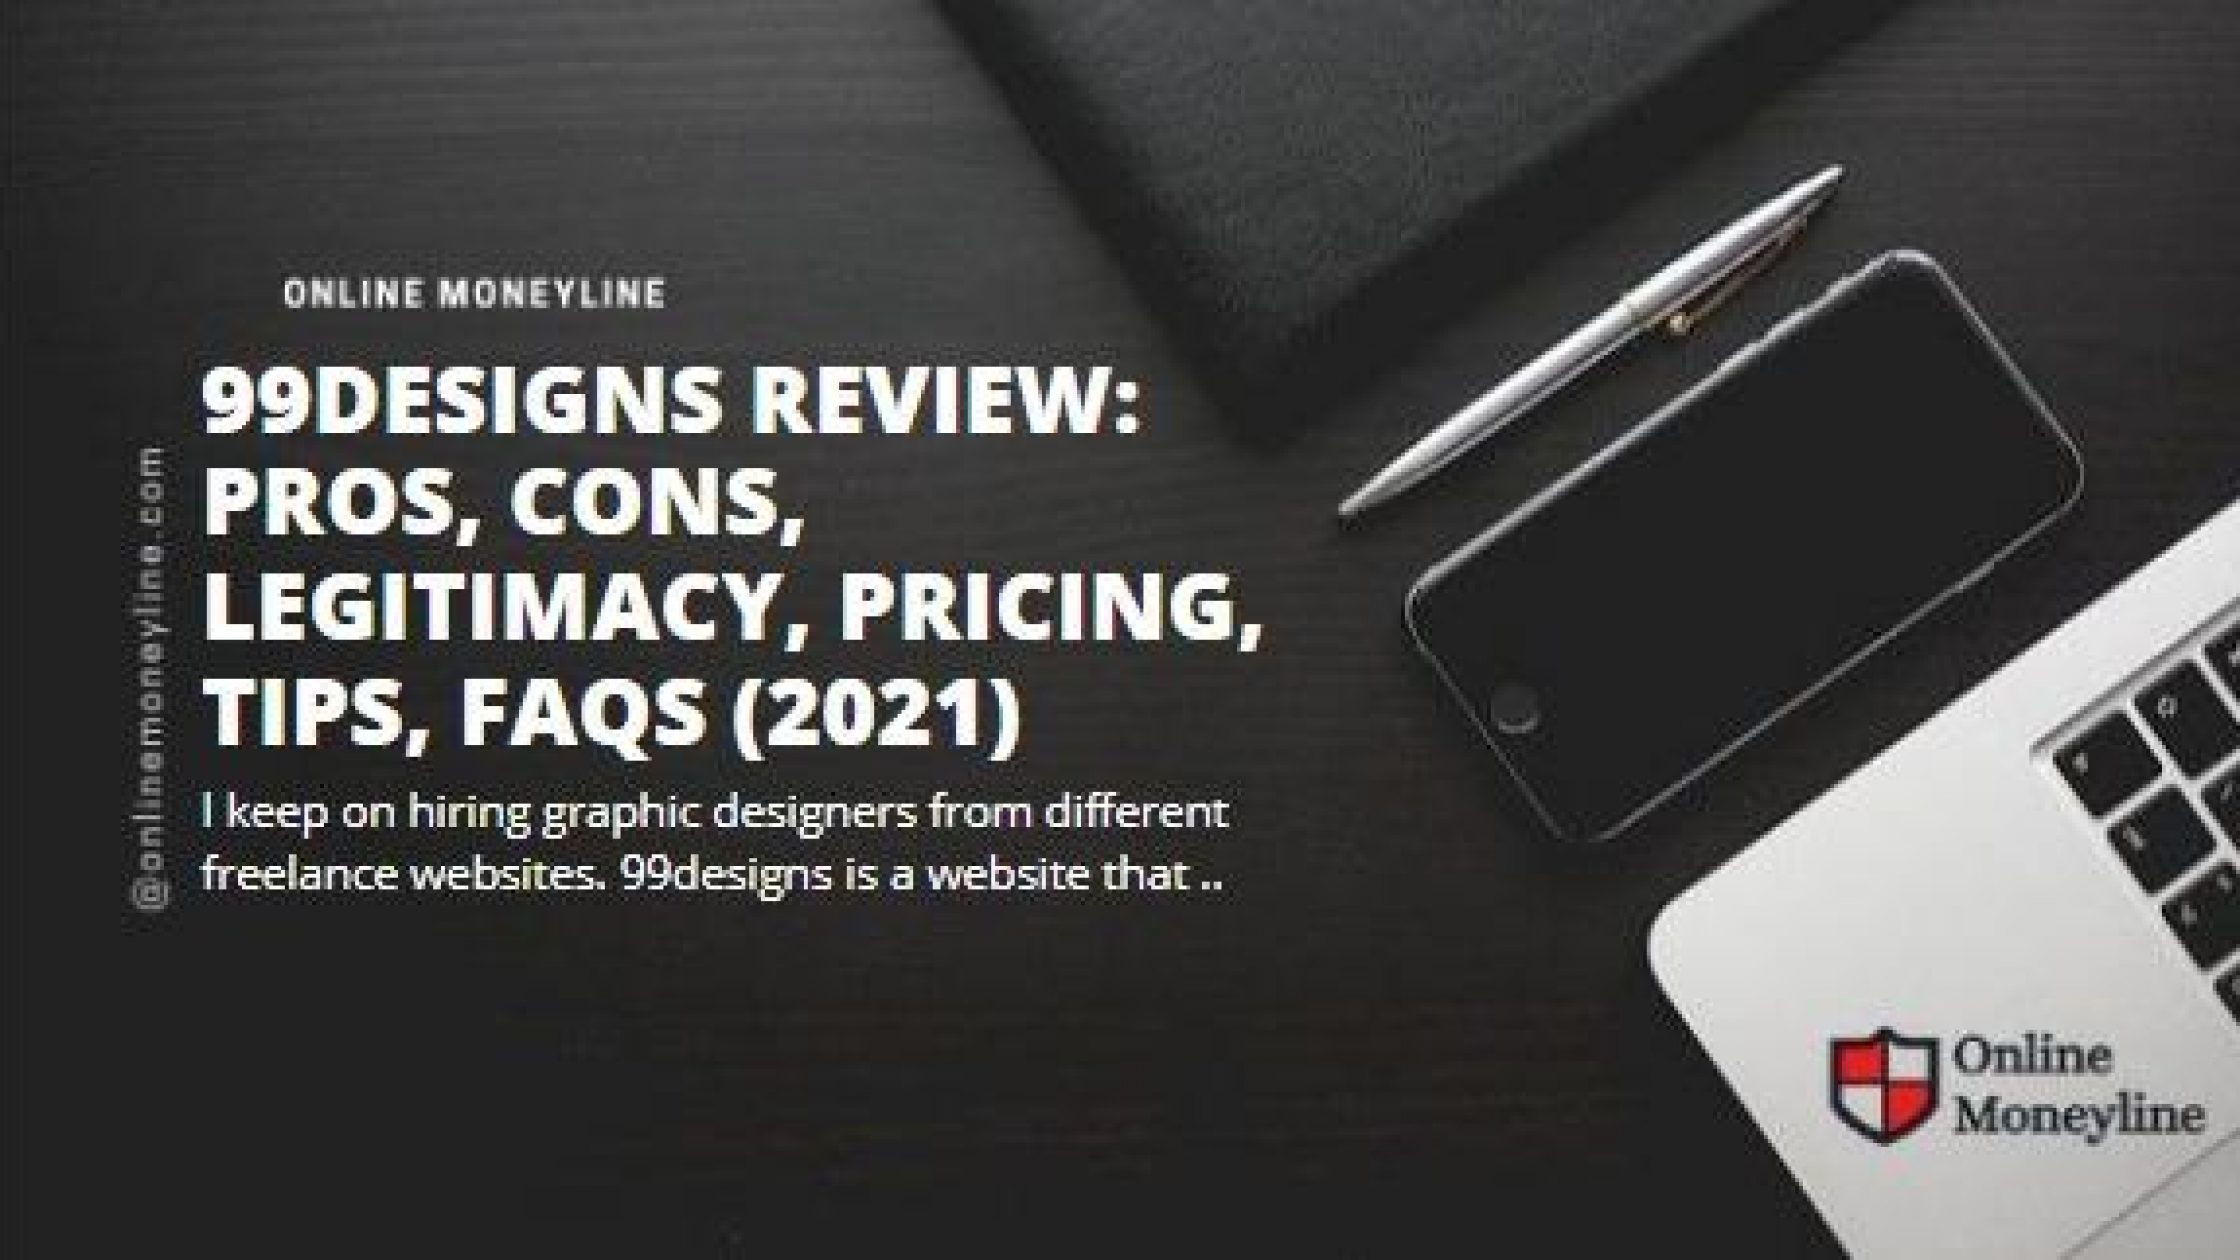 99Designs Review: Pros, Cons, Legitimacy, Pricing, Tips, FAQs (2021)